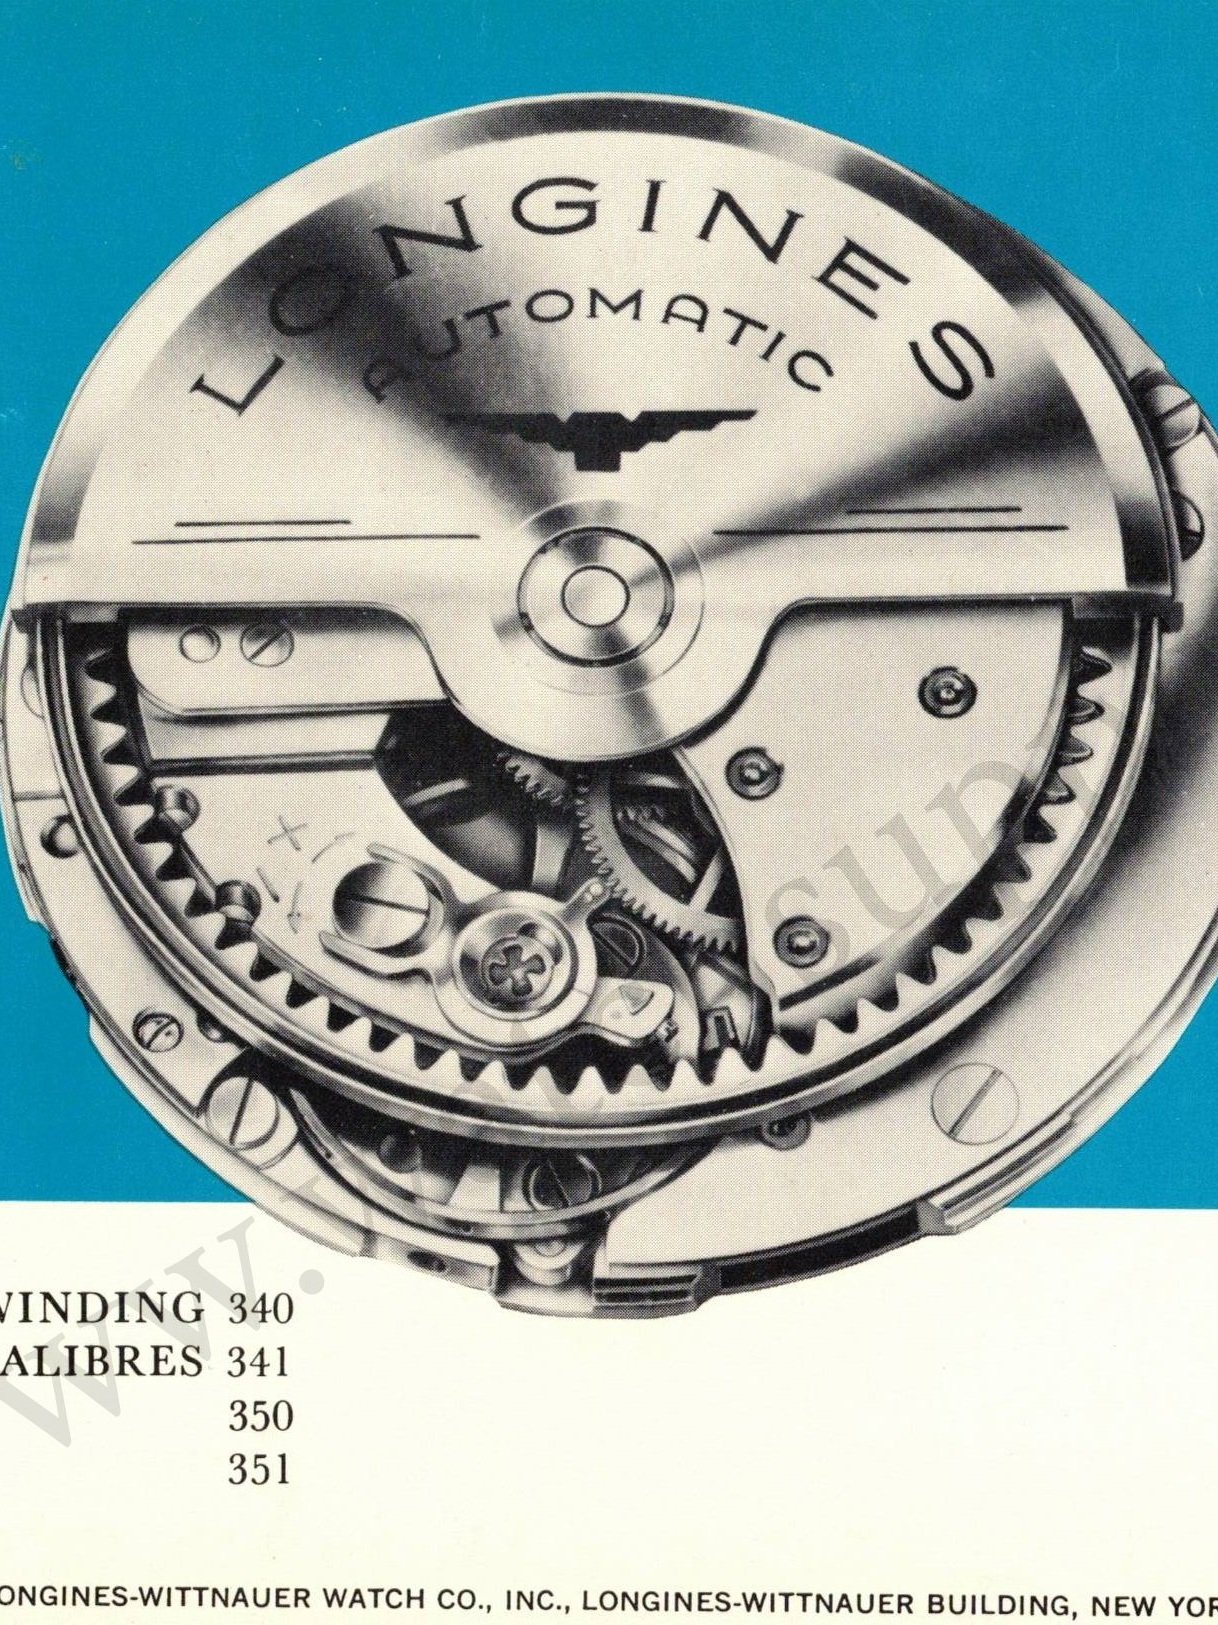 Longines 340 Technical Information